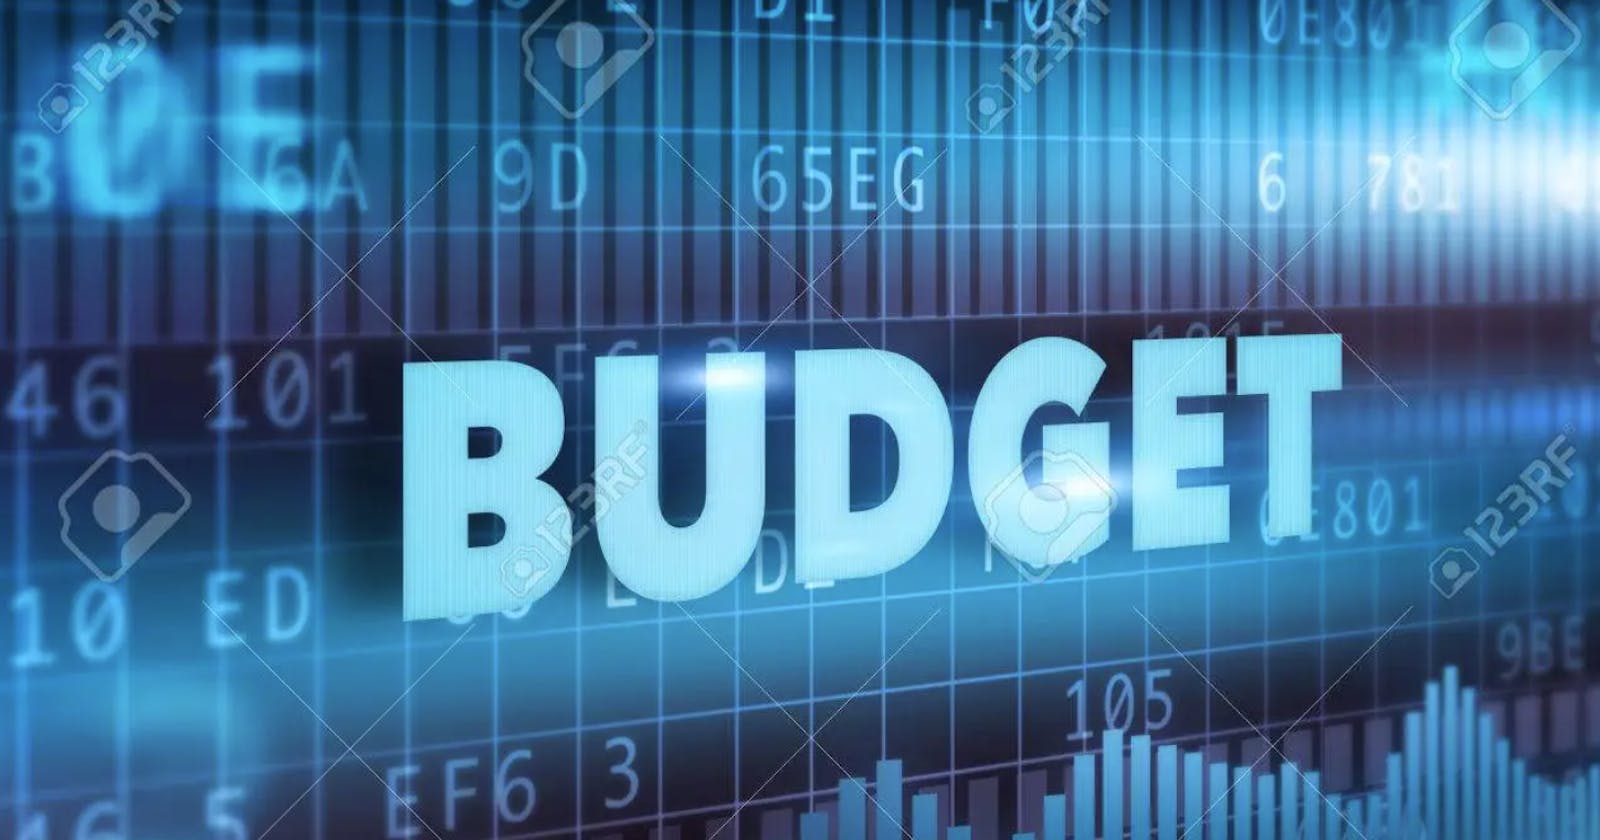 Using React to create a Budget Manager